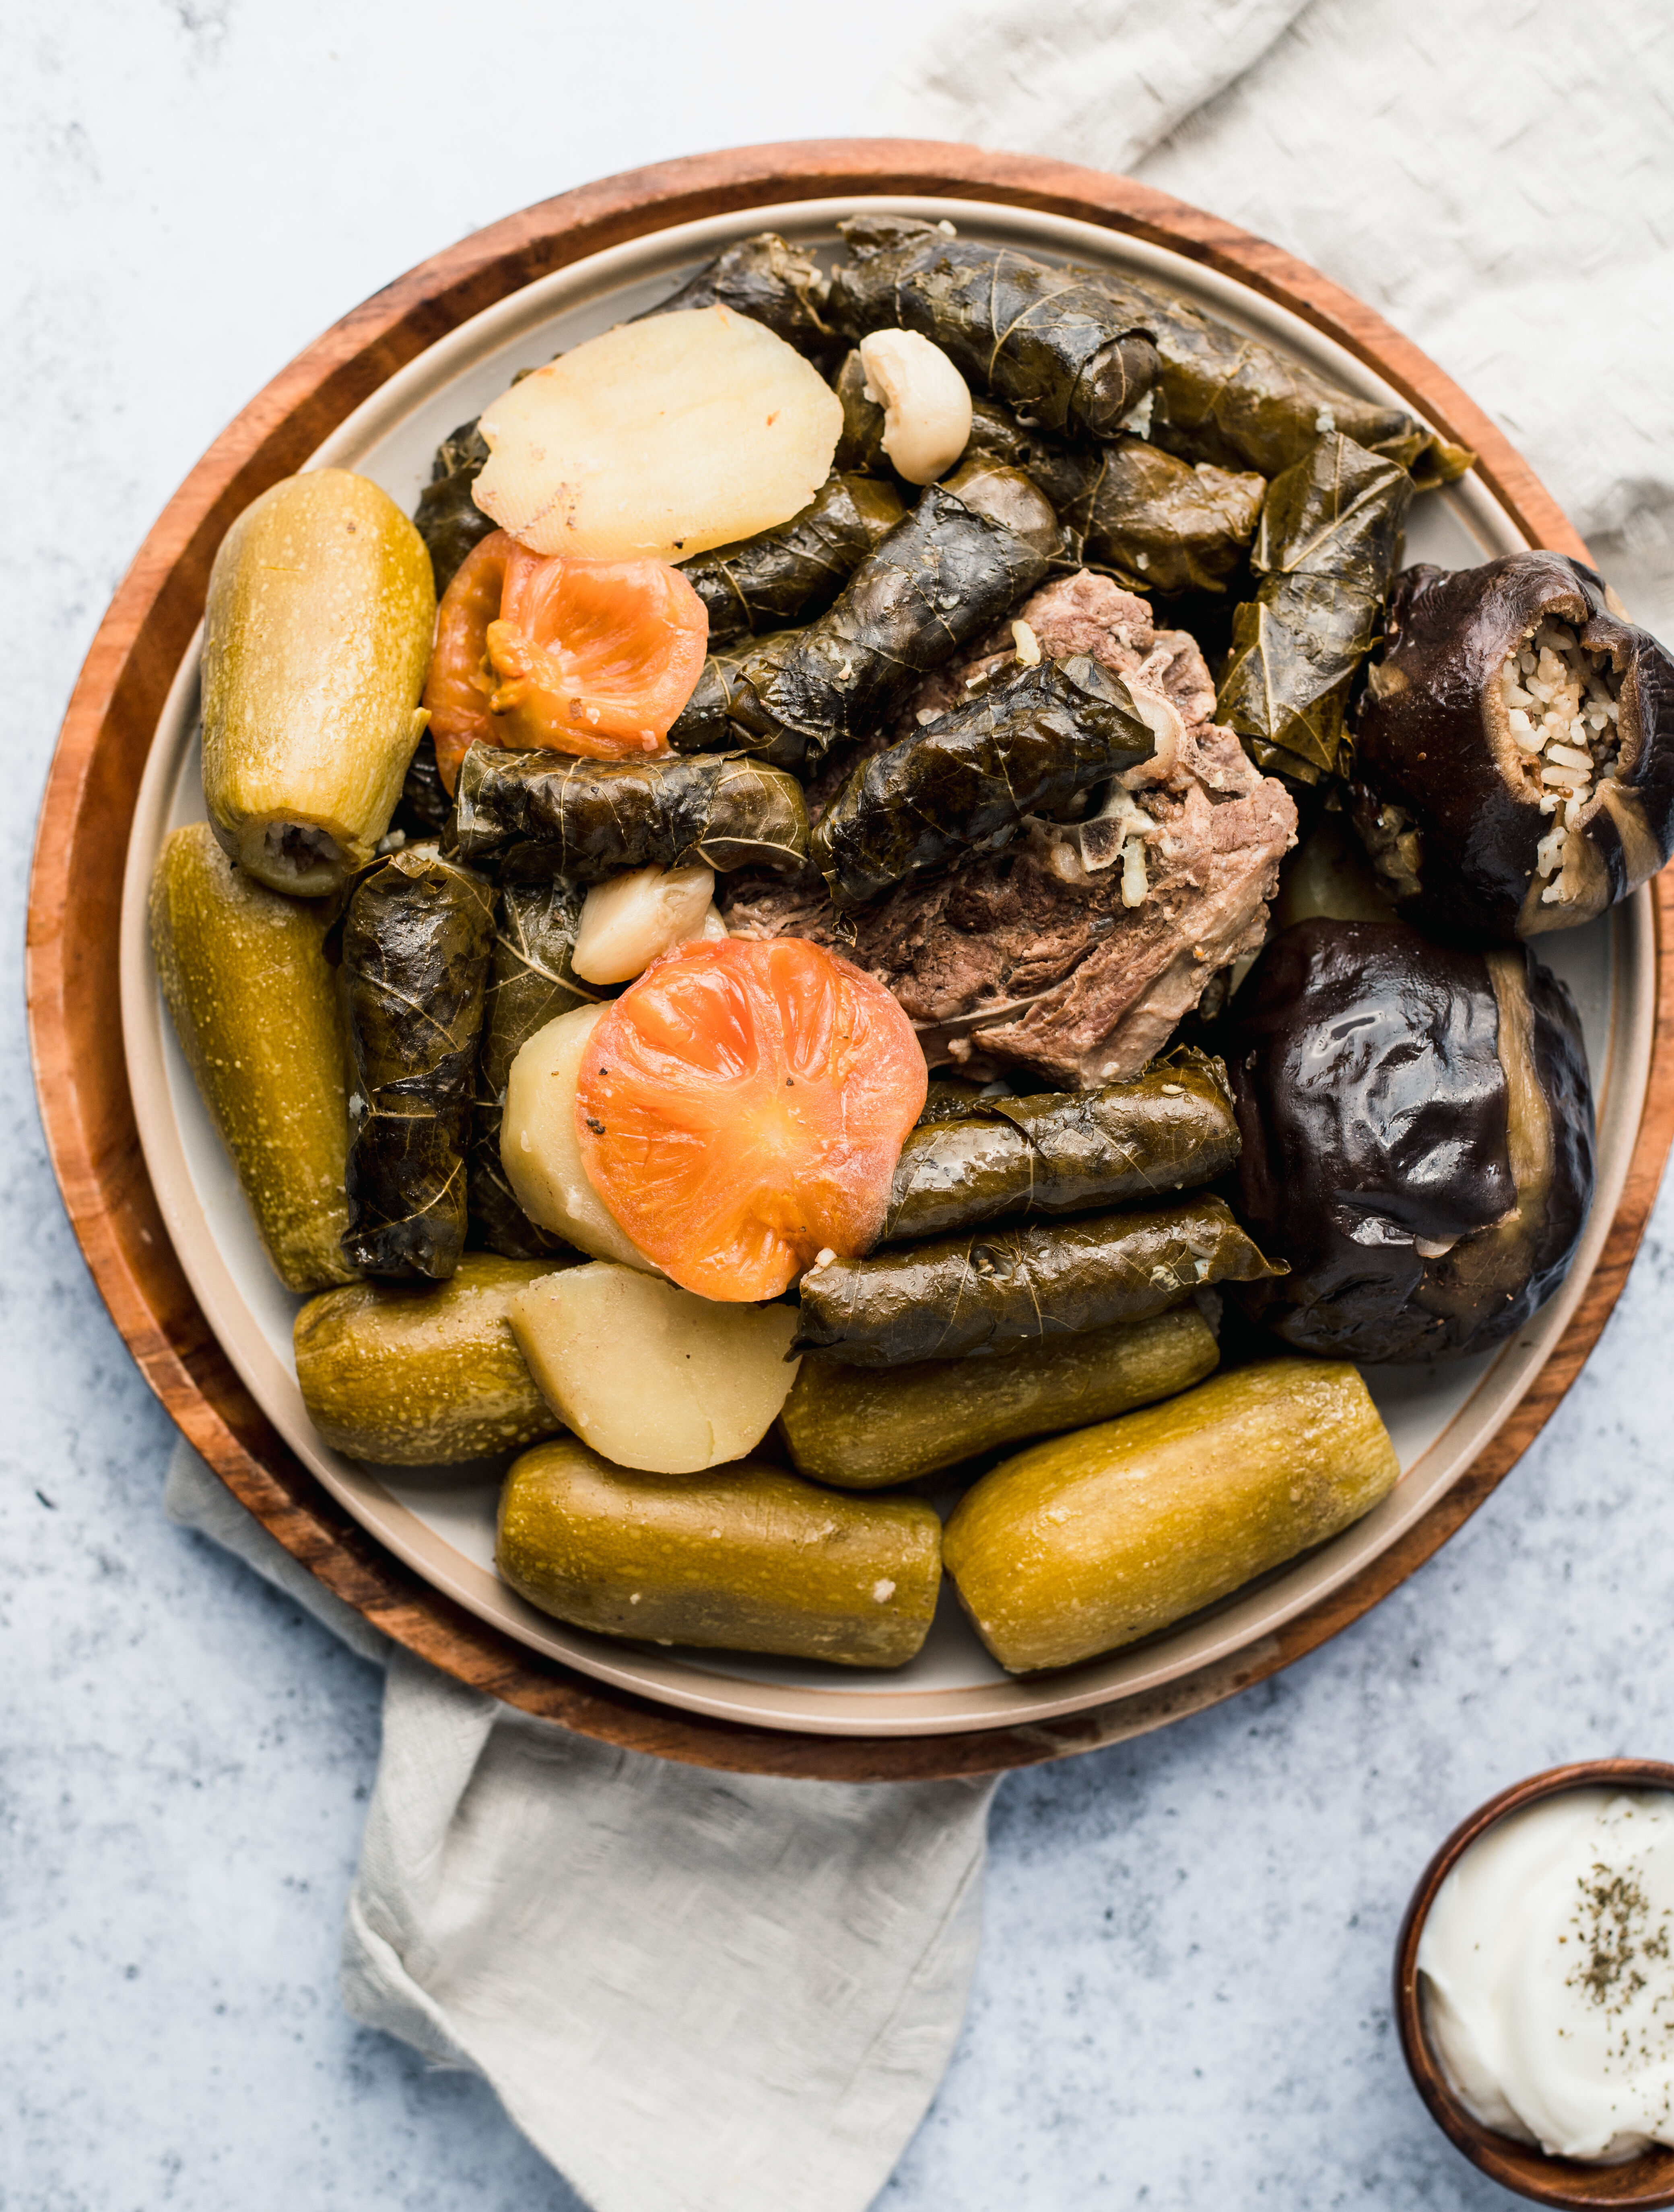 Middle Eastern Stuffed Grape Leaves With Meat Recipe By Farah Maizar The Feedfeed,Educational Websites Clipart